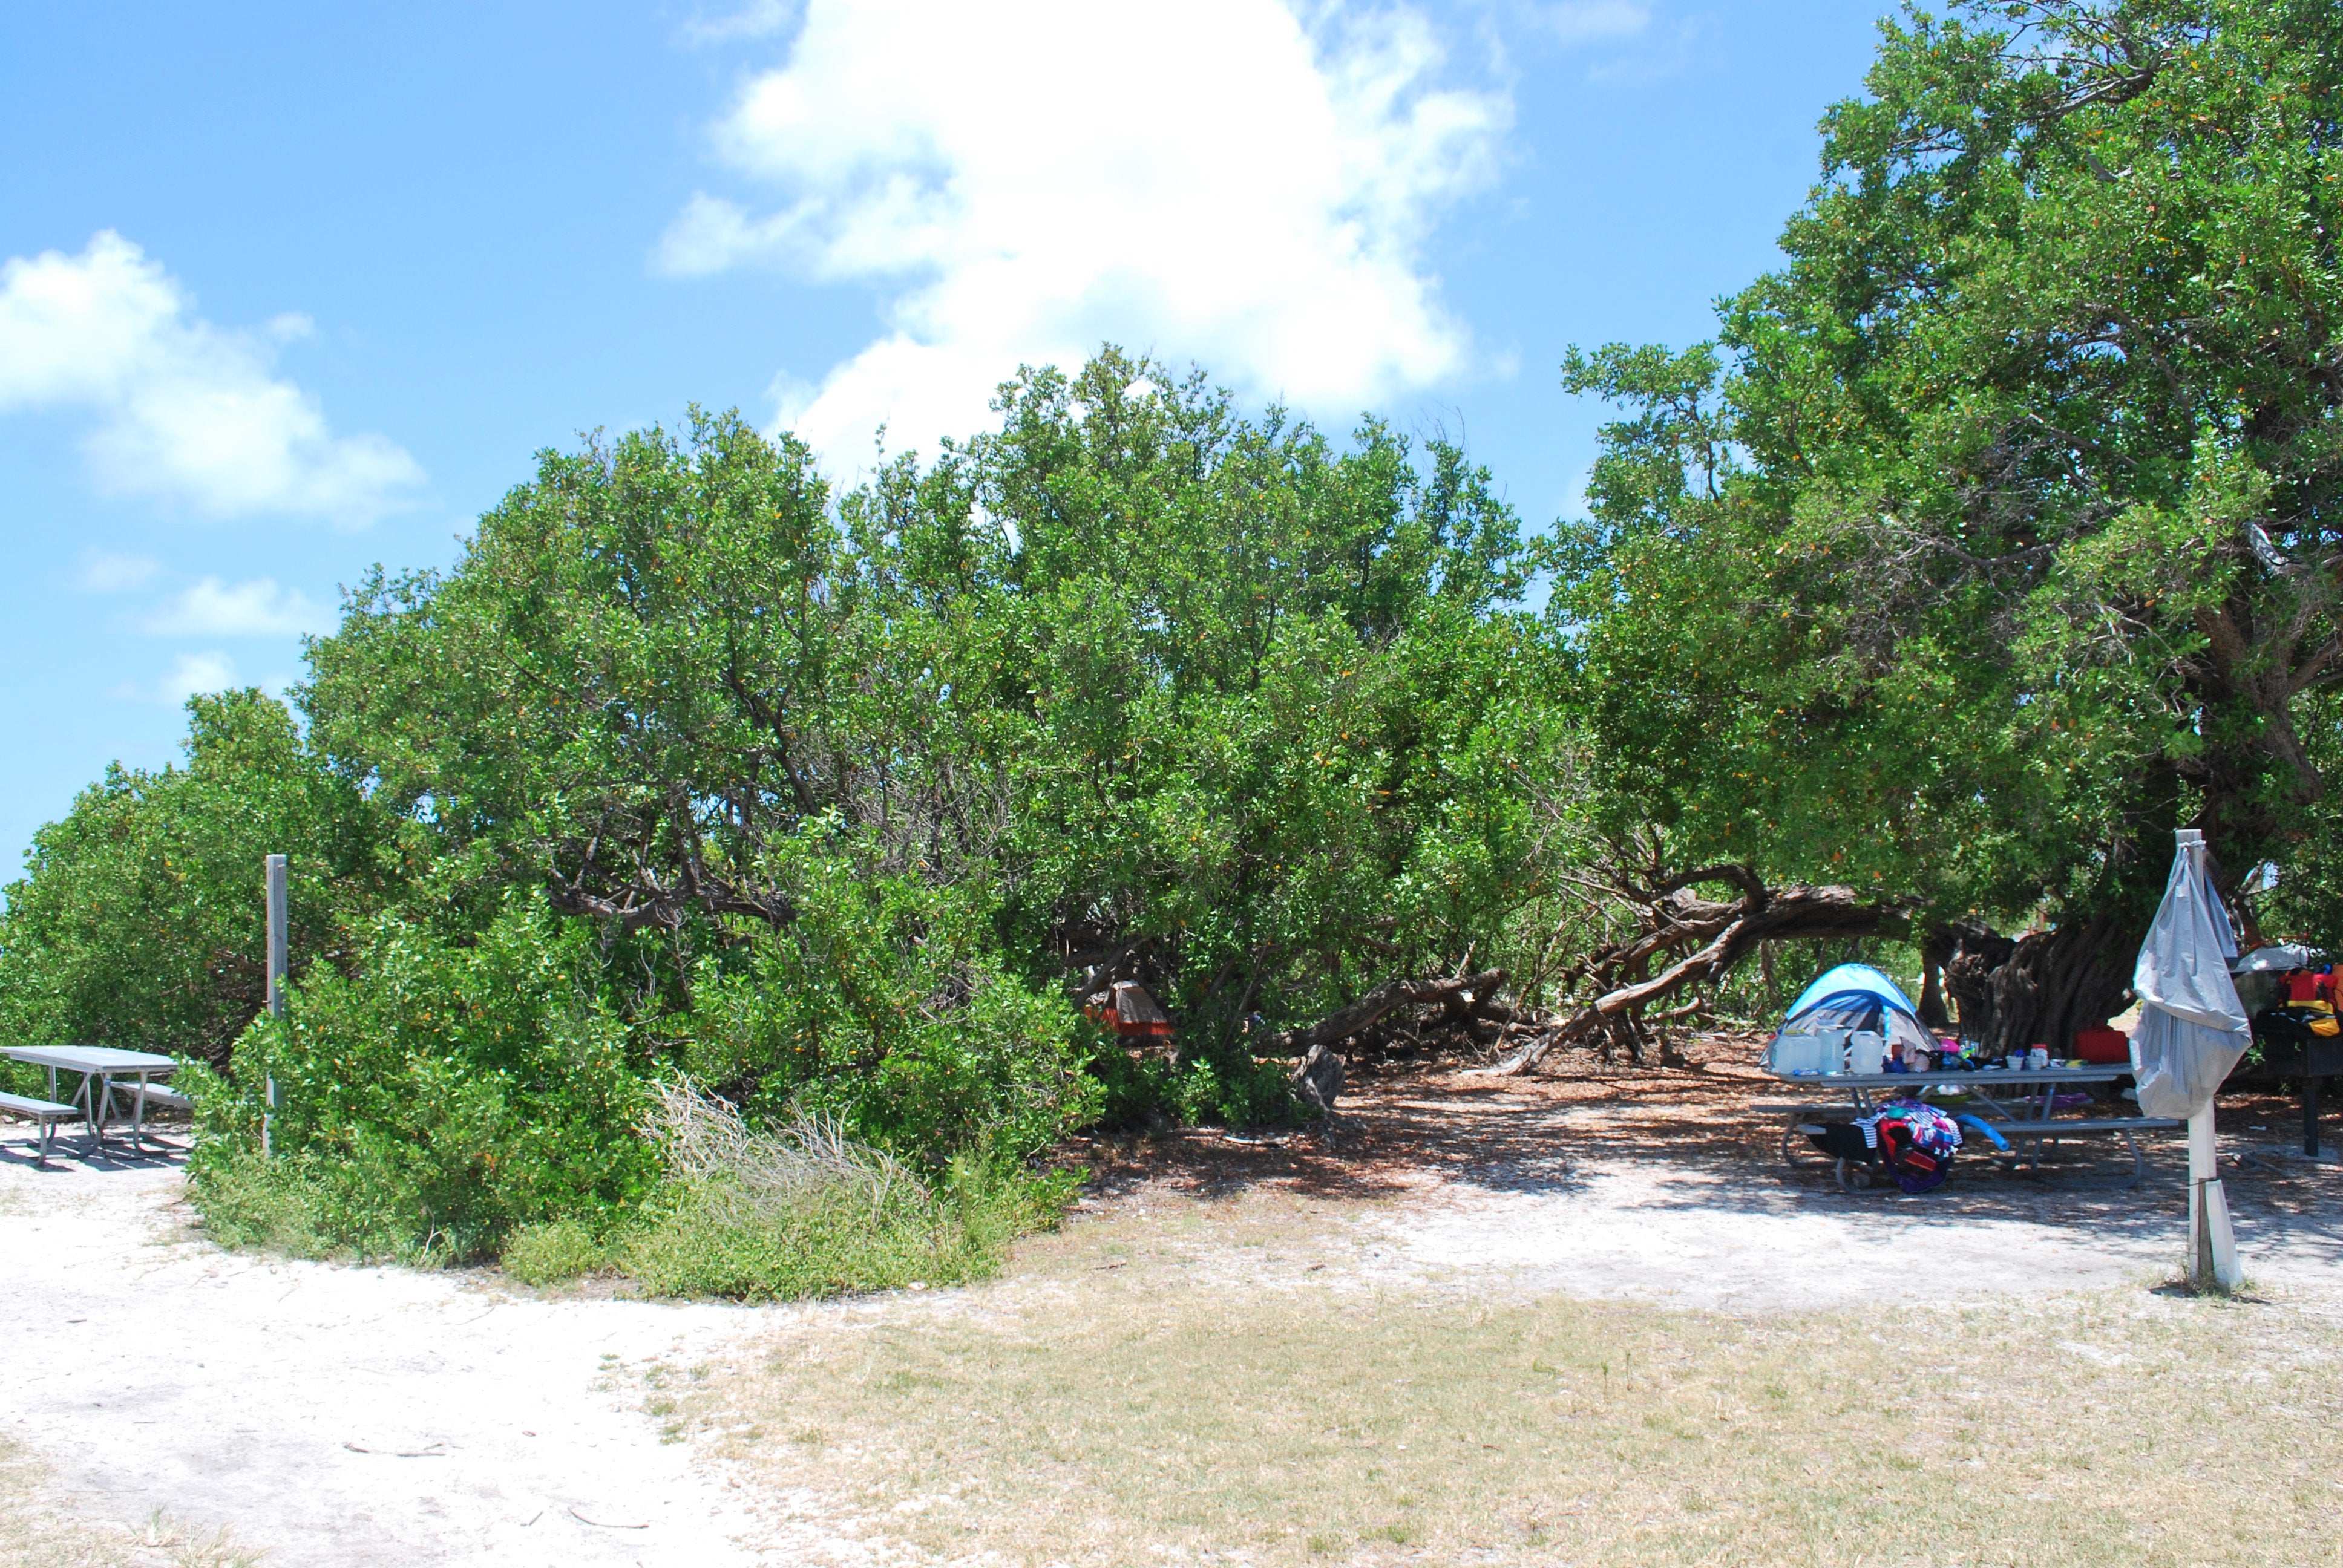 This is the only clump of trees on the island.  Inside the clump are the individual camp sites.